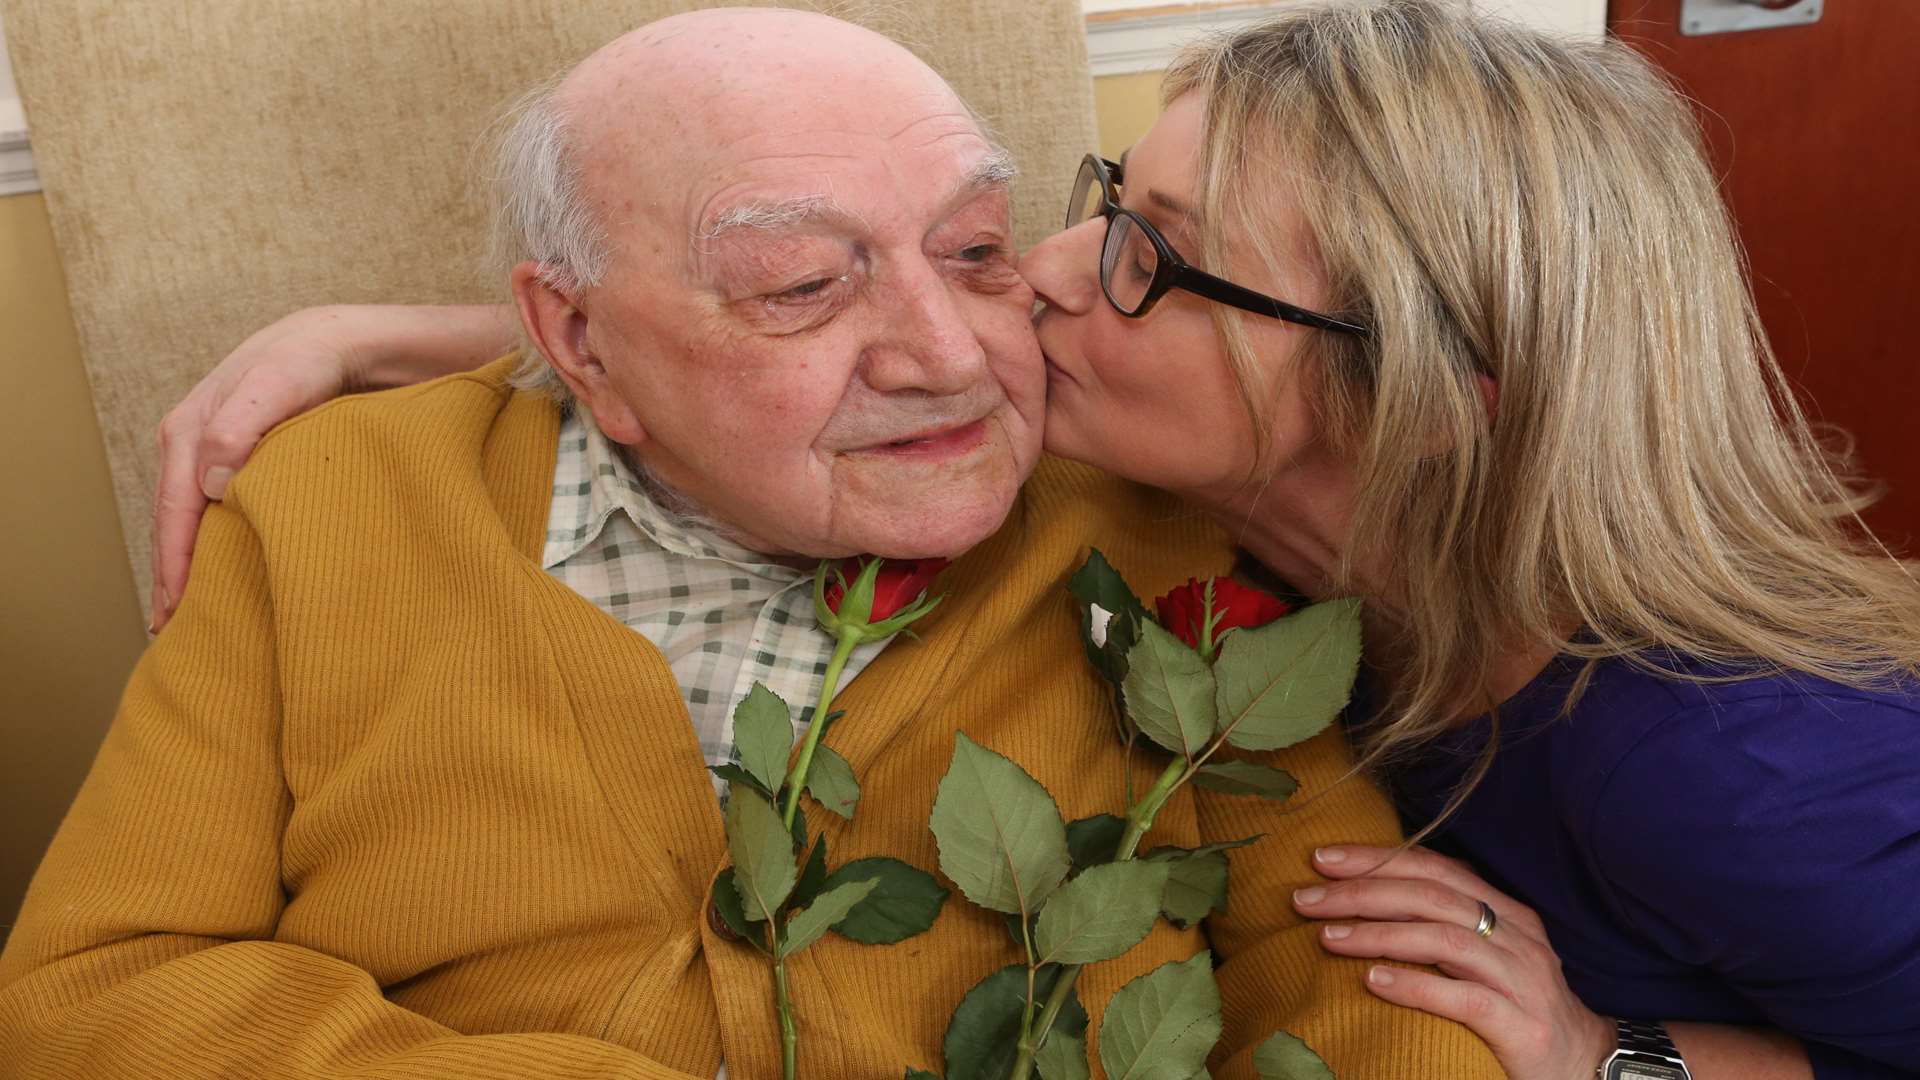 George Ridgewell, 93, gets a cheeky kiss from area manager Nicola Palladino. Picture: John Westhrop